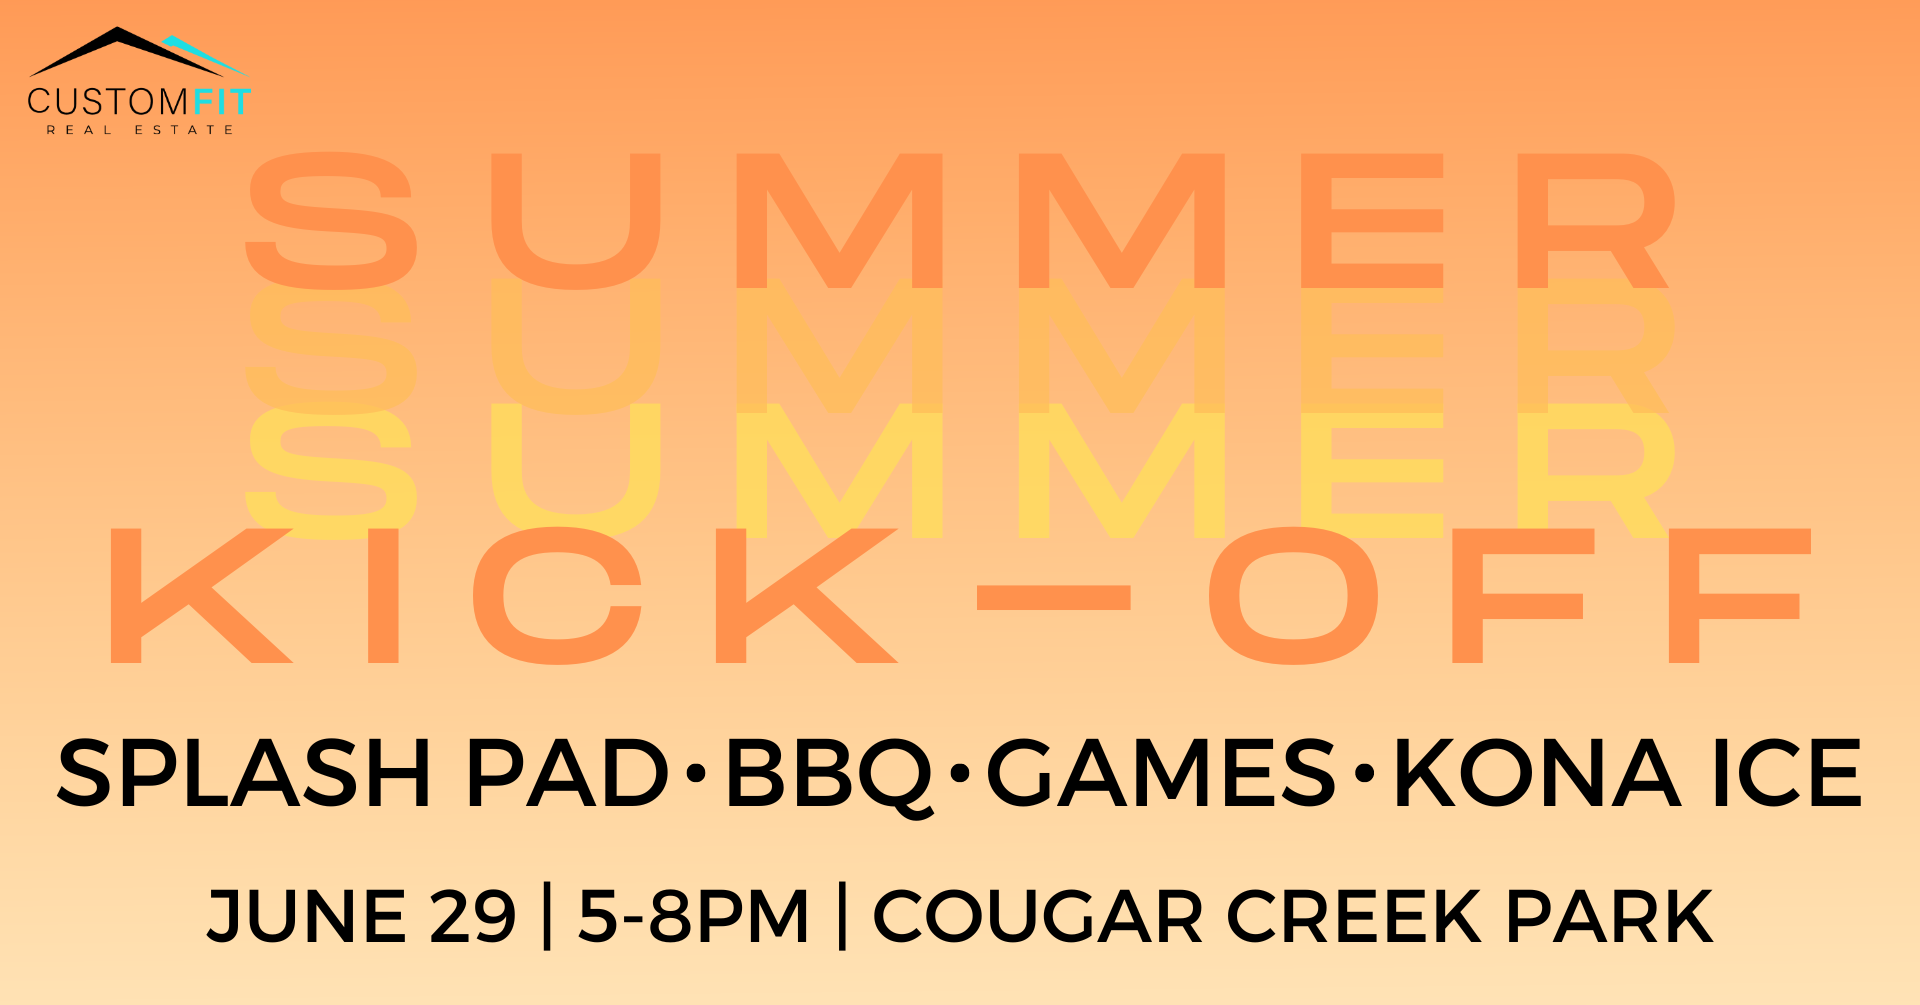 Custom Fit Real Estate Summer Kick-Off Event. Splash pad, BBQ, games, and Kona Ice. Wednesday, June 29, 2022 from 5-8pm at Cougar Creek Park in Las Vegas, Nevada.